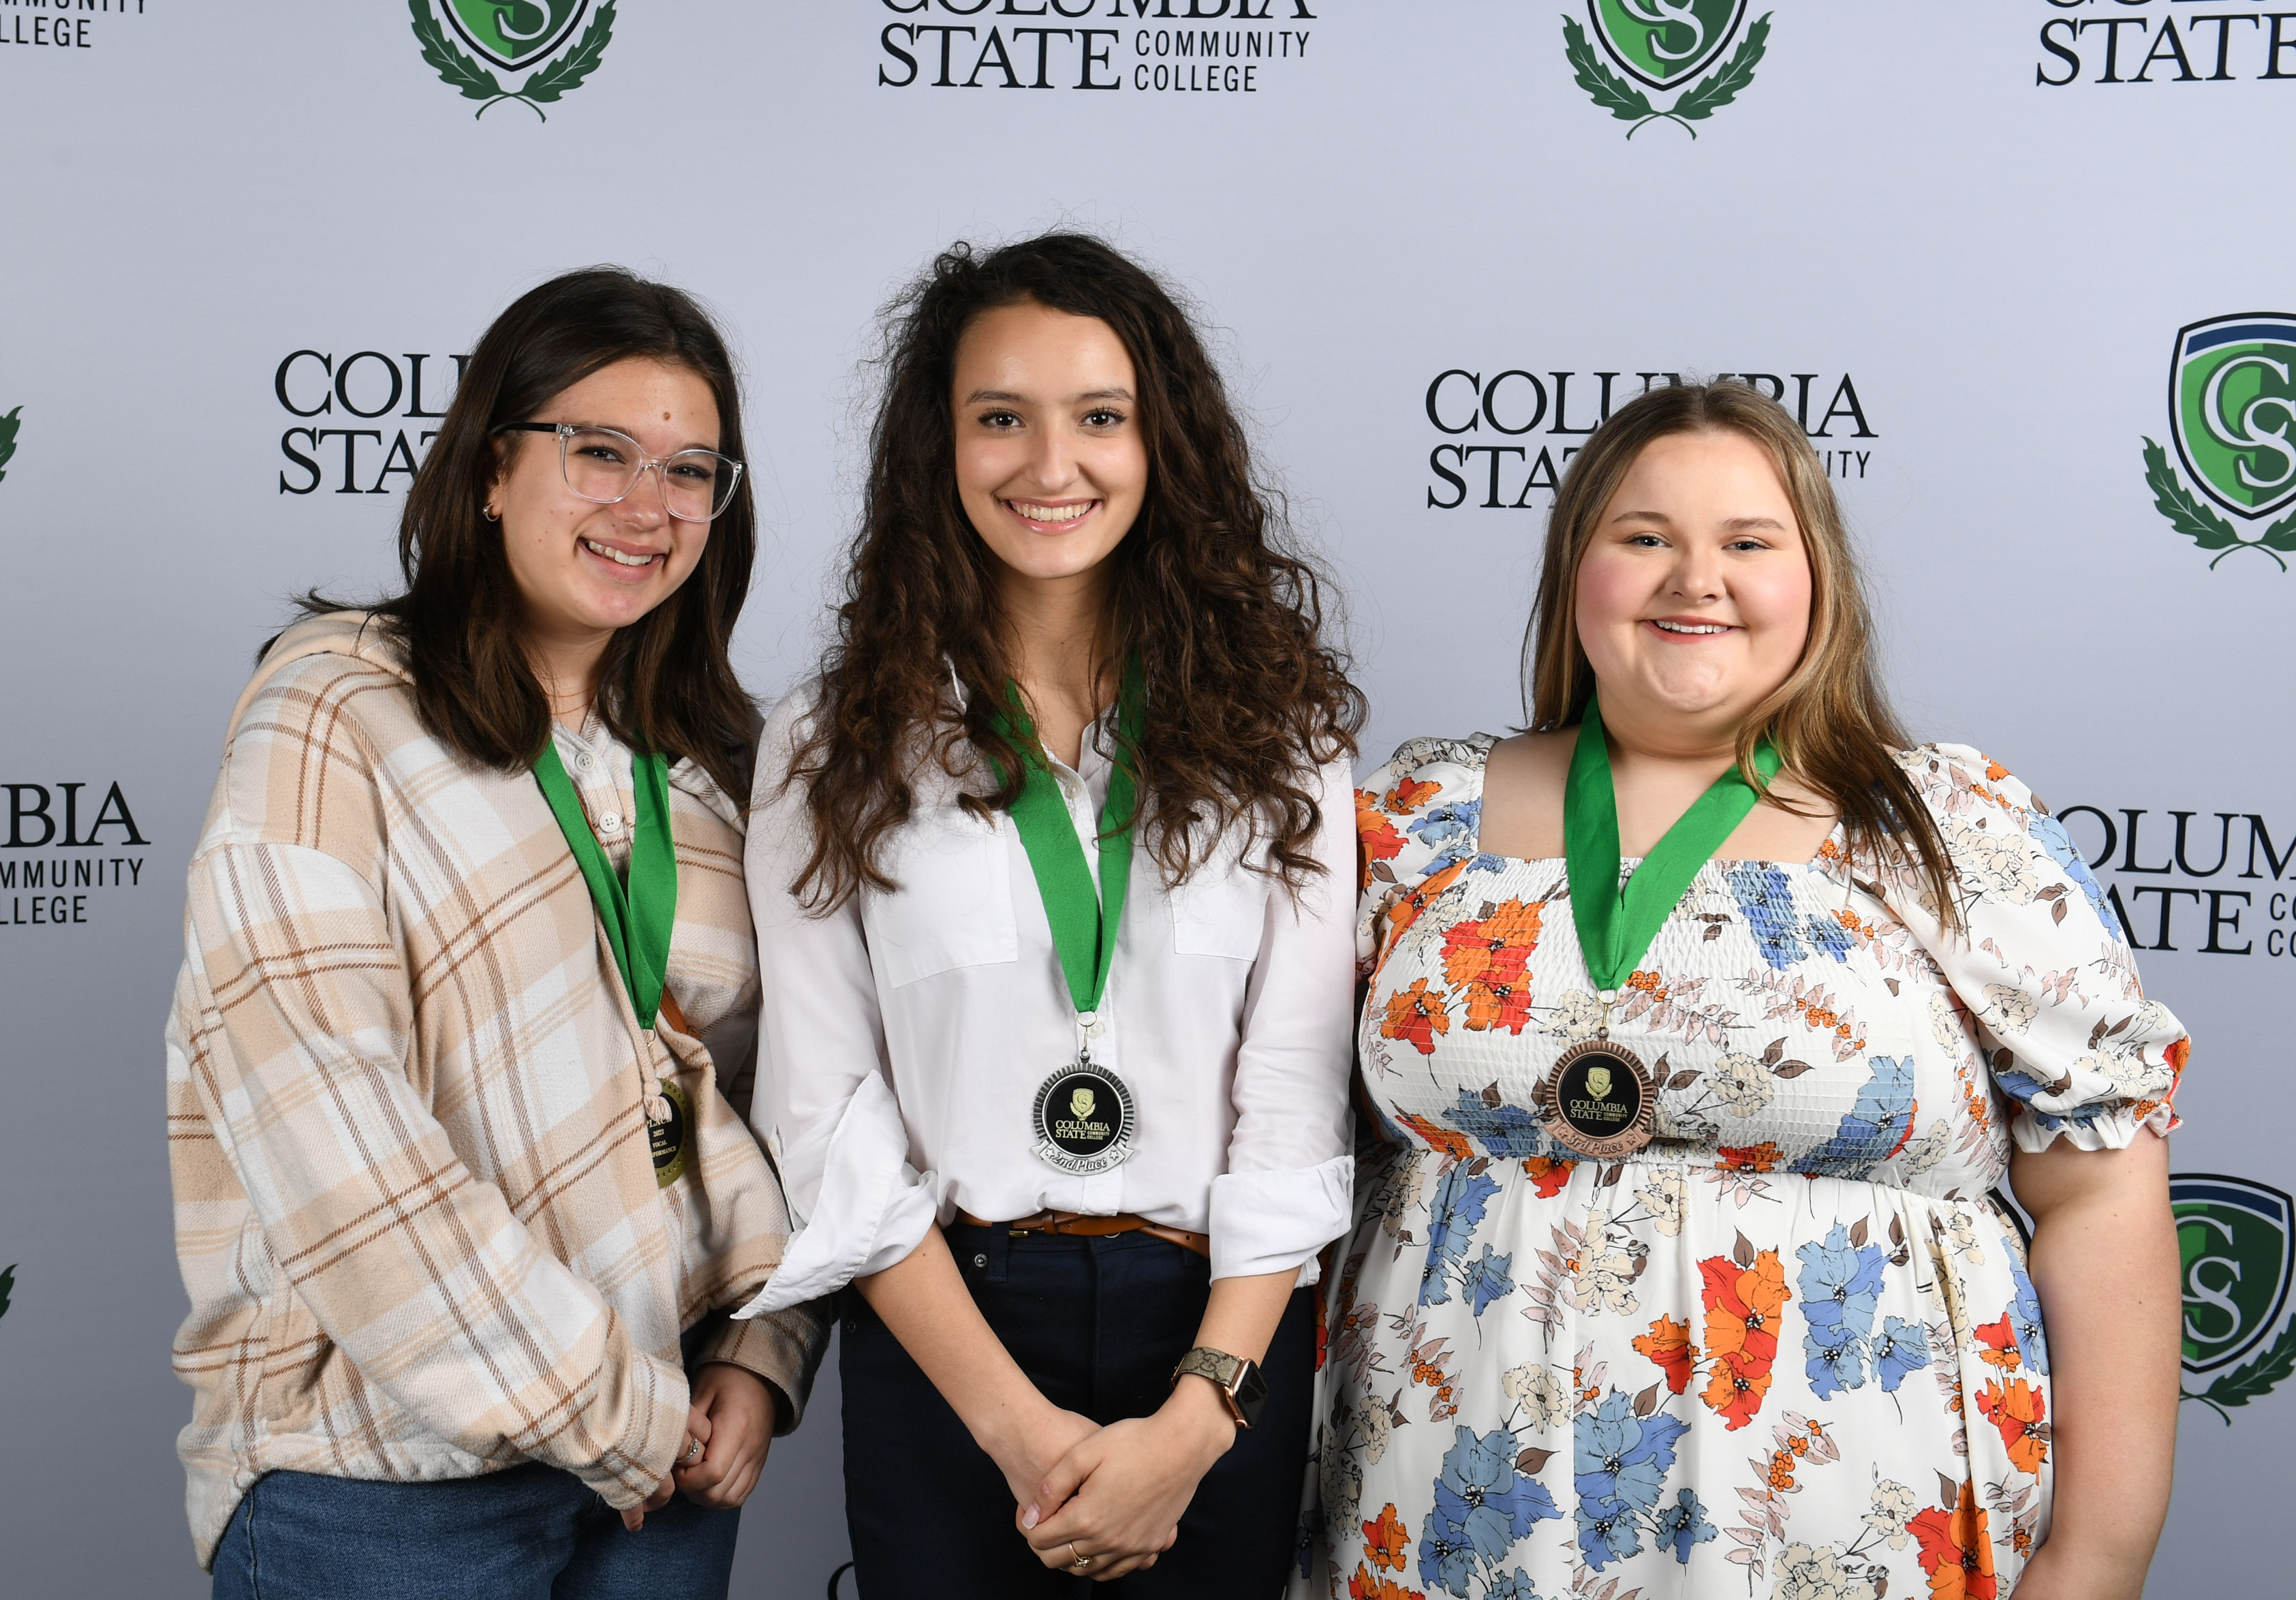 Vocal Performance Winners (left to right): First place winner, Nadya Hughes of Spring Hill High School; second place winner, Sofi SanMiguel of Columbia Academy; and third place winner, Macy Short of Loretto High School.